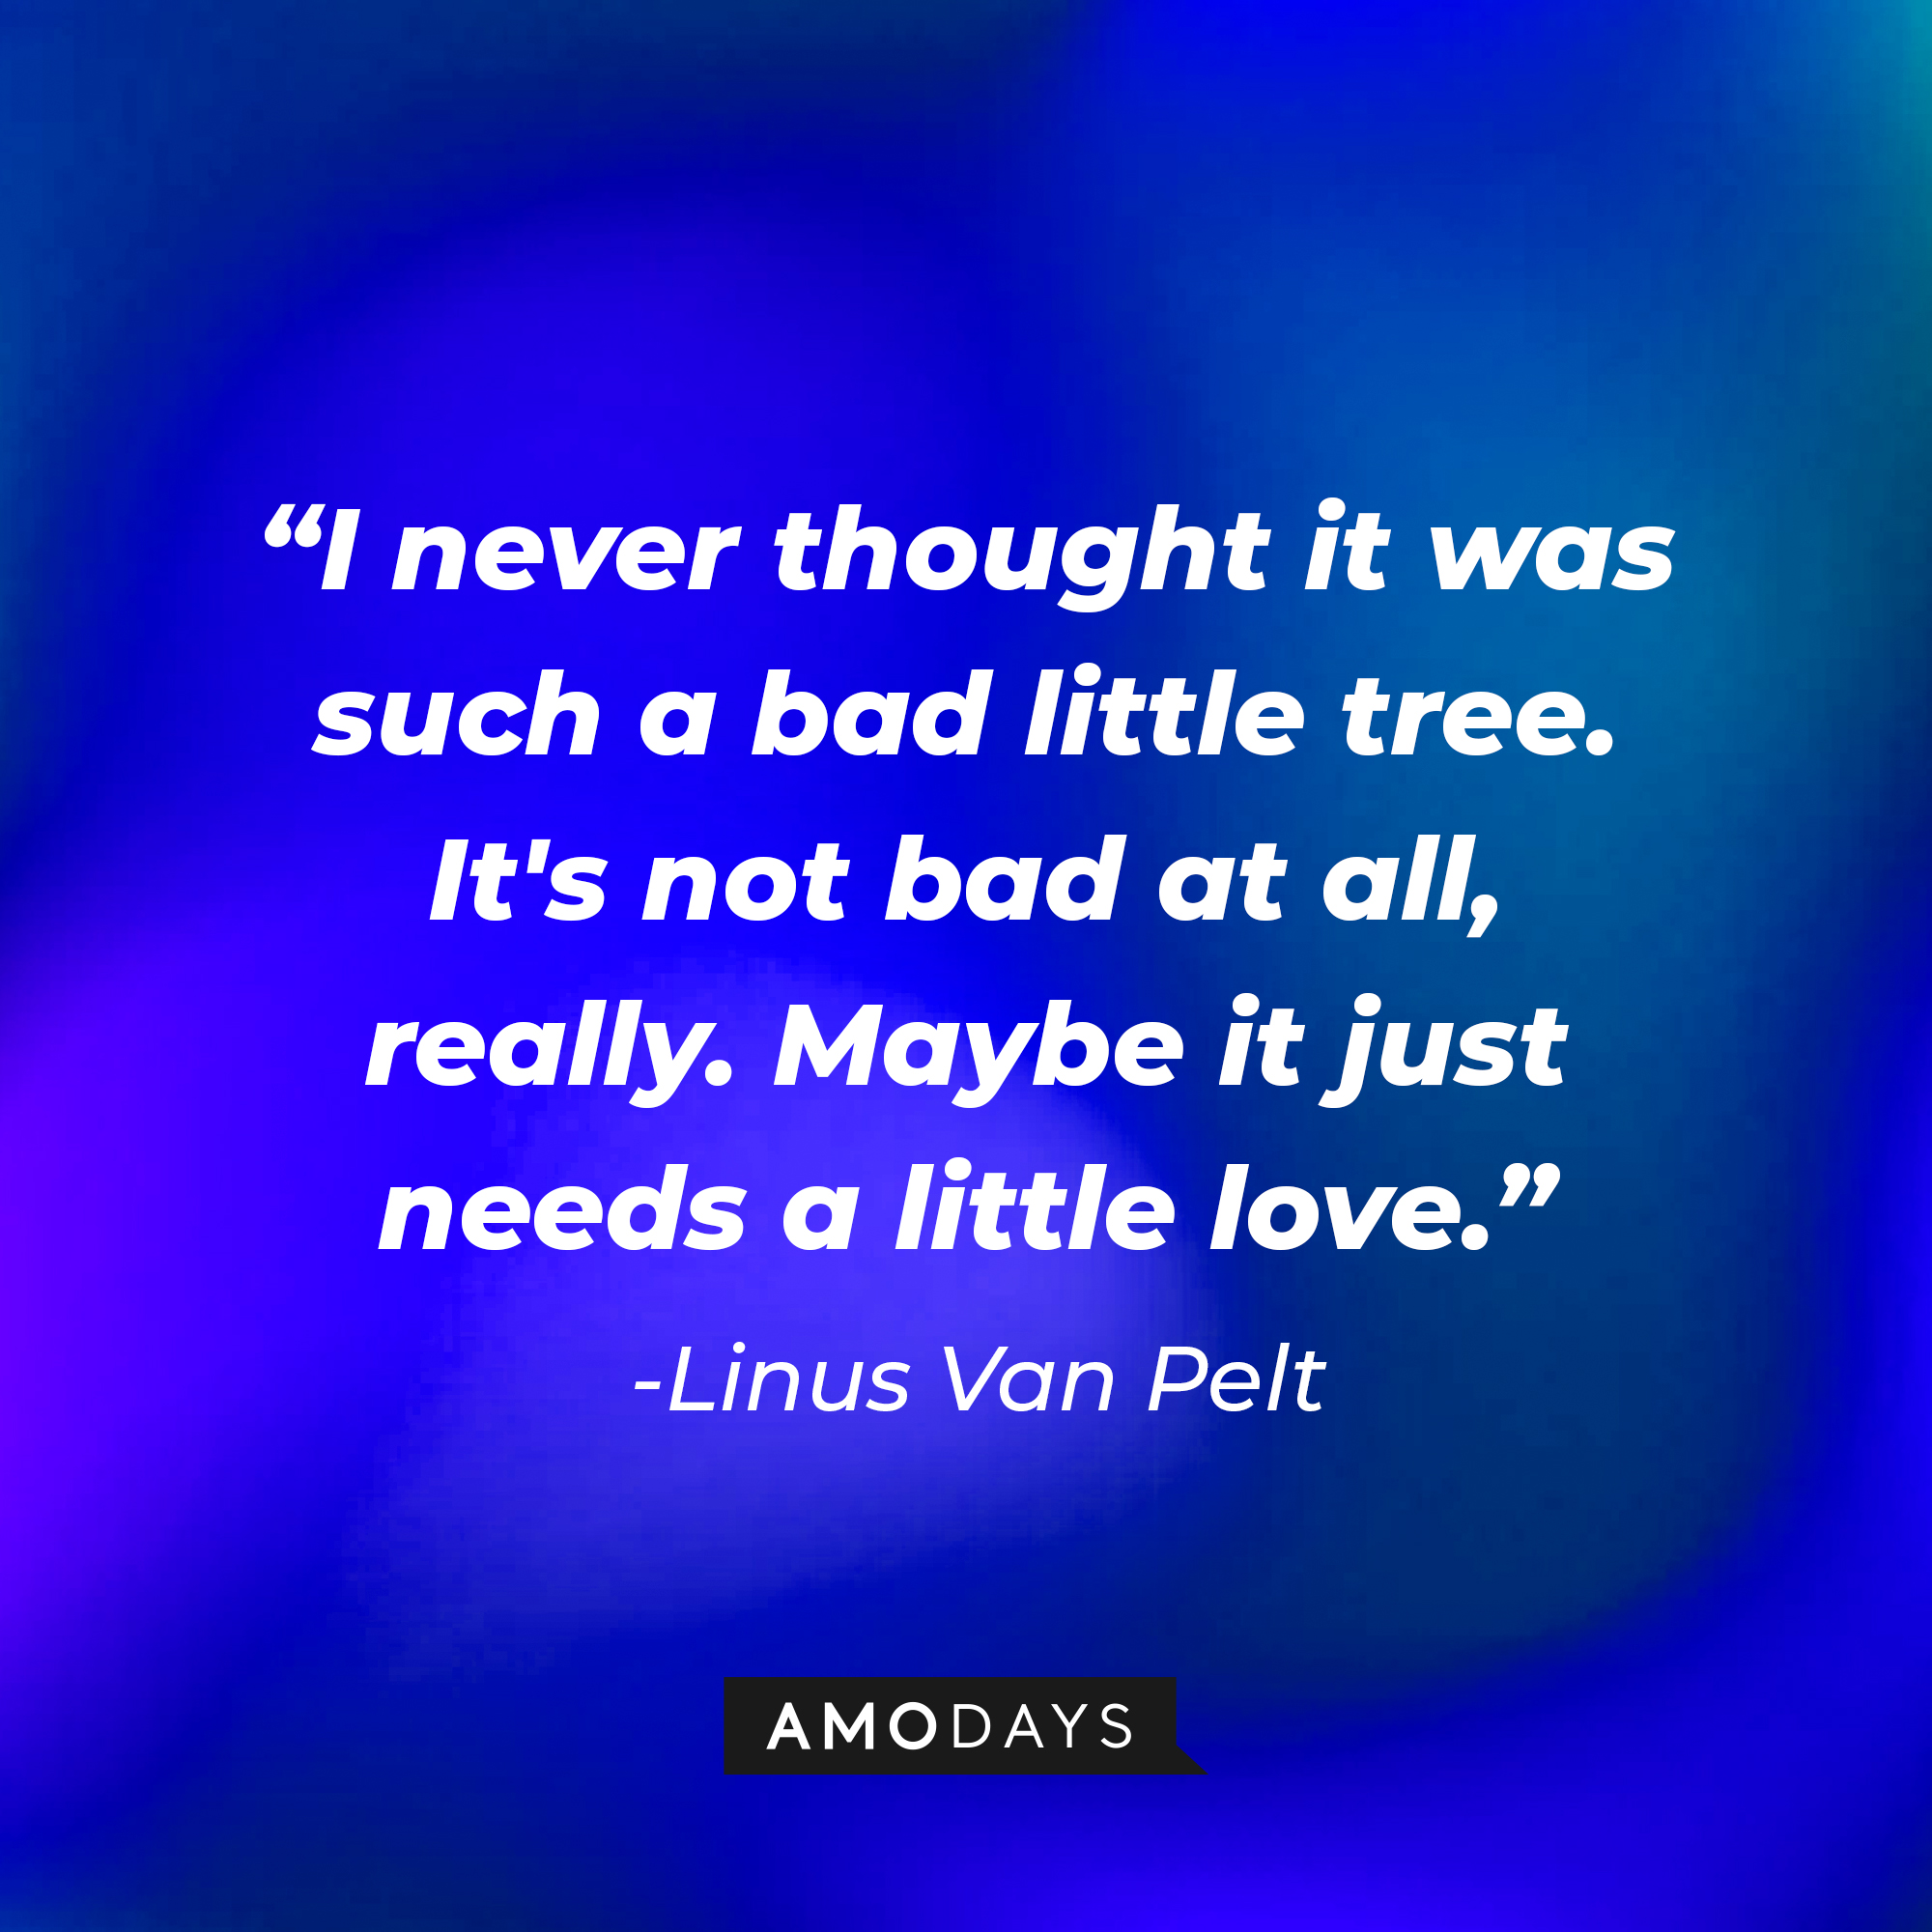 Linus Van Pelt" quote: "I never thought it was such a bad little tree. It's not bad at all, really. Maybe it just needs a little love." | Source: Amodays